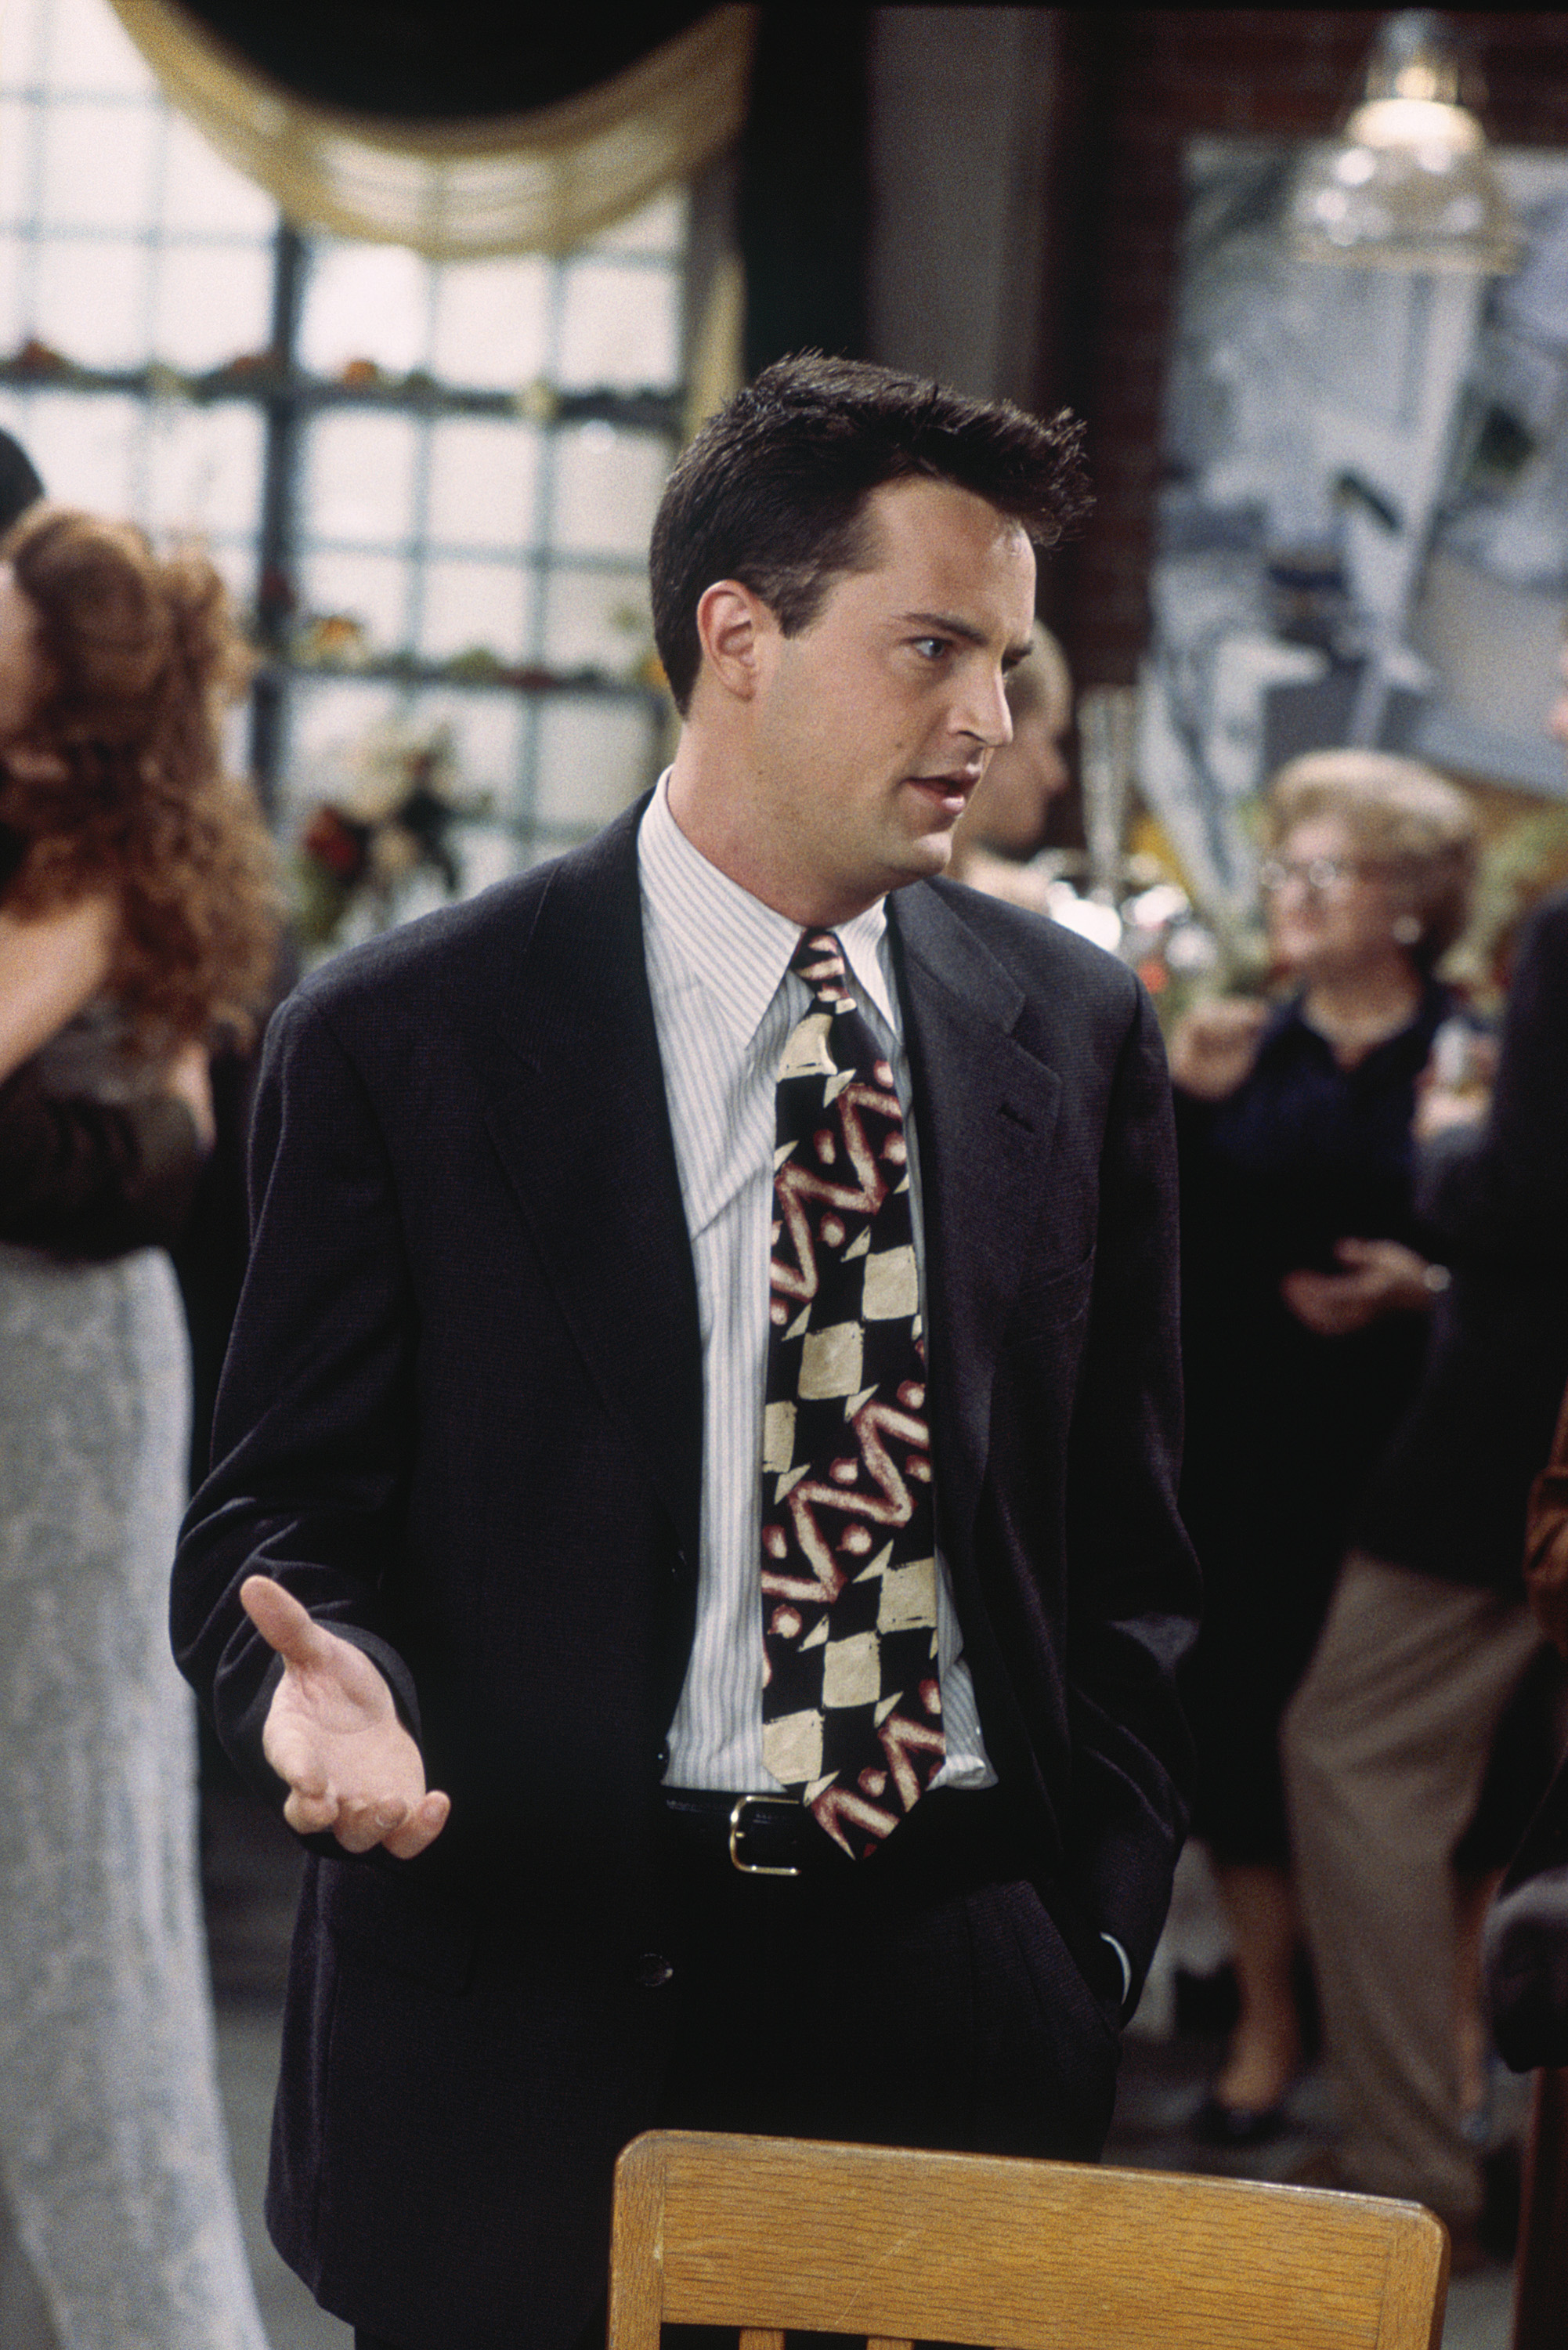 Matthew Perry as Chandler Bing on the set of "Friends" on November 14, 1995 | Source: Getty Images